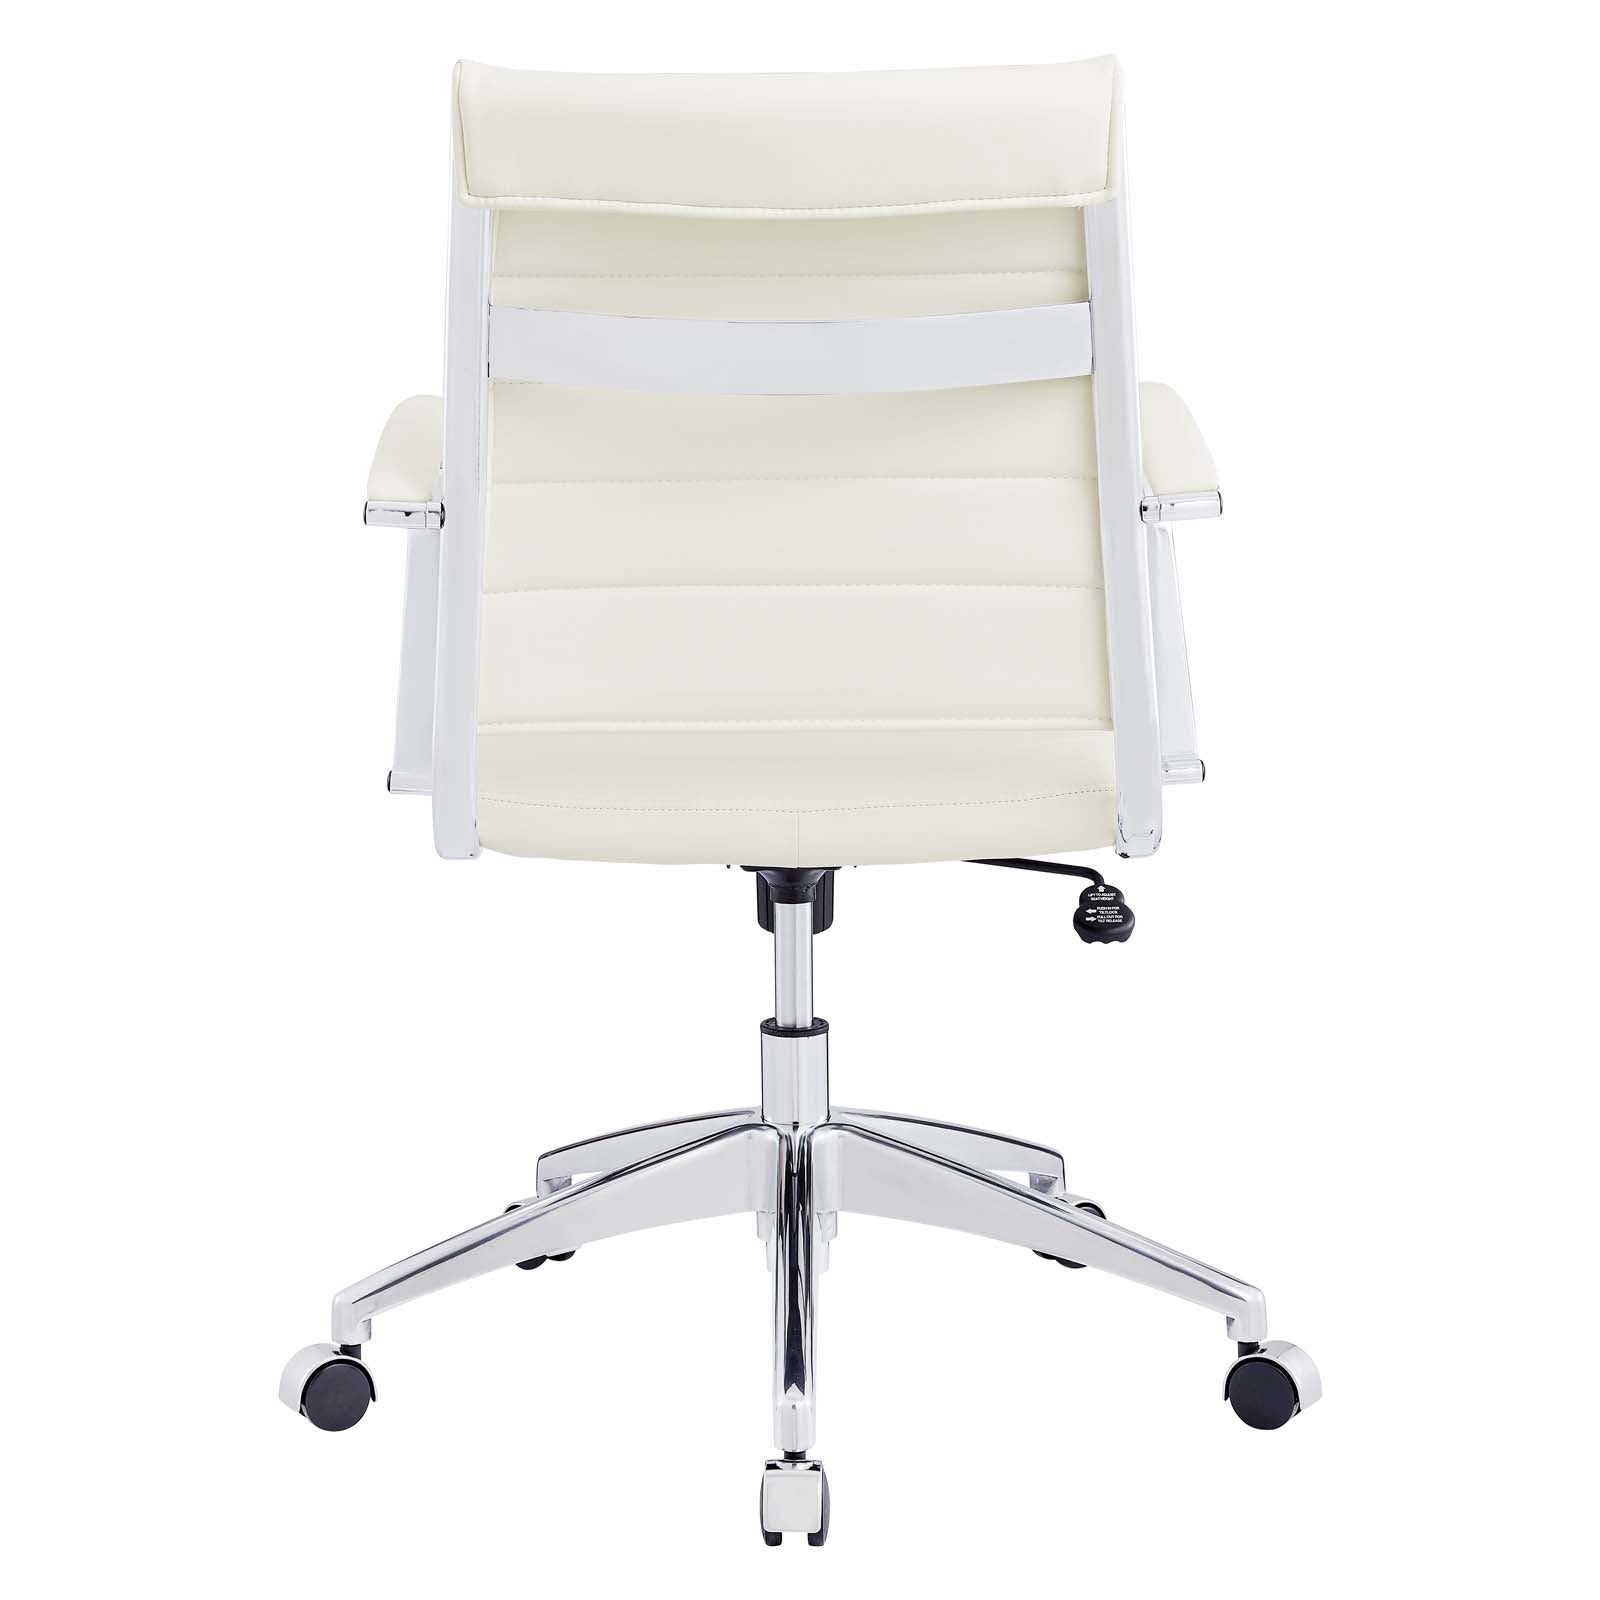 Modway Task Chairs - Jive Mid Back Office Chair White